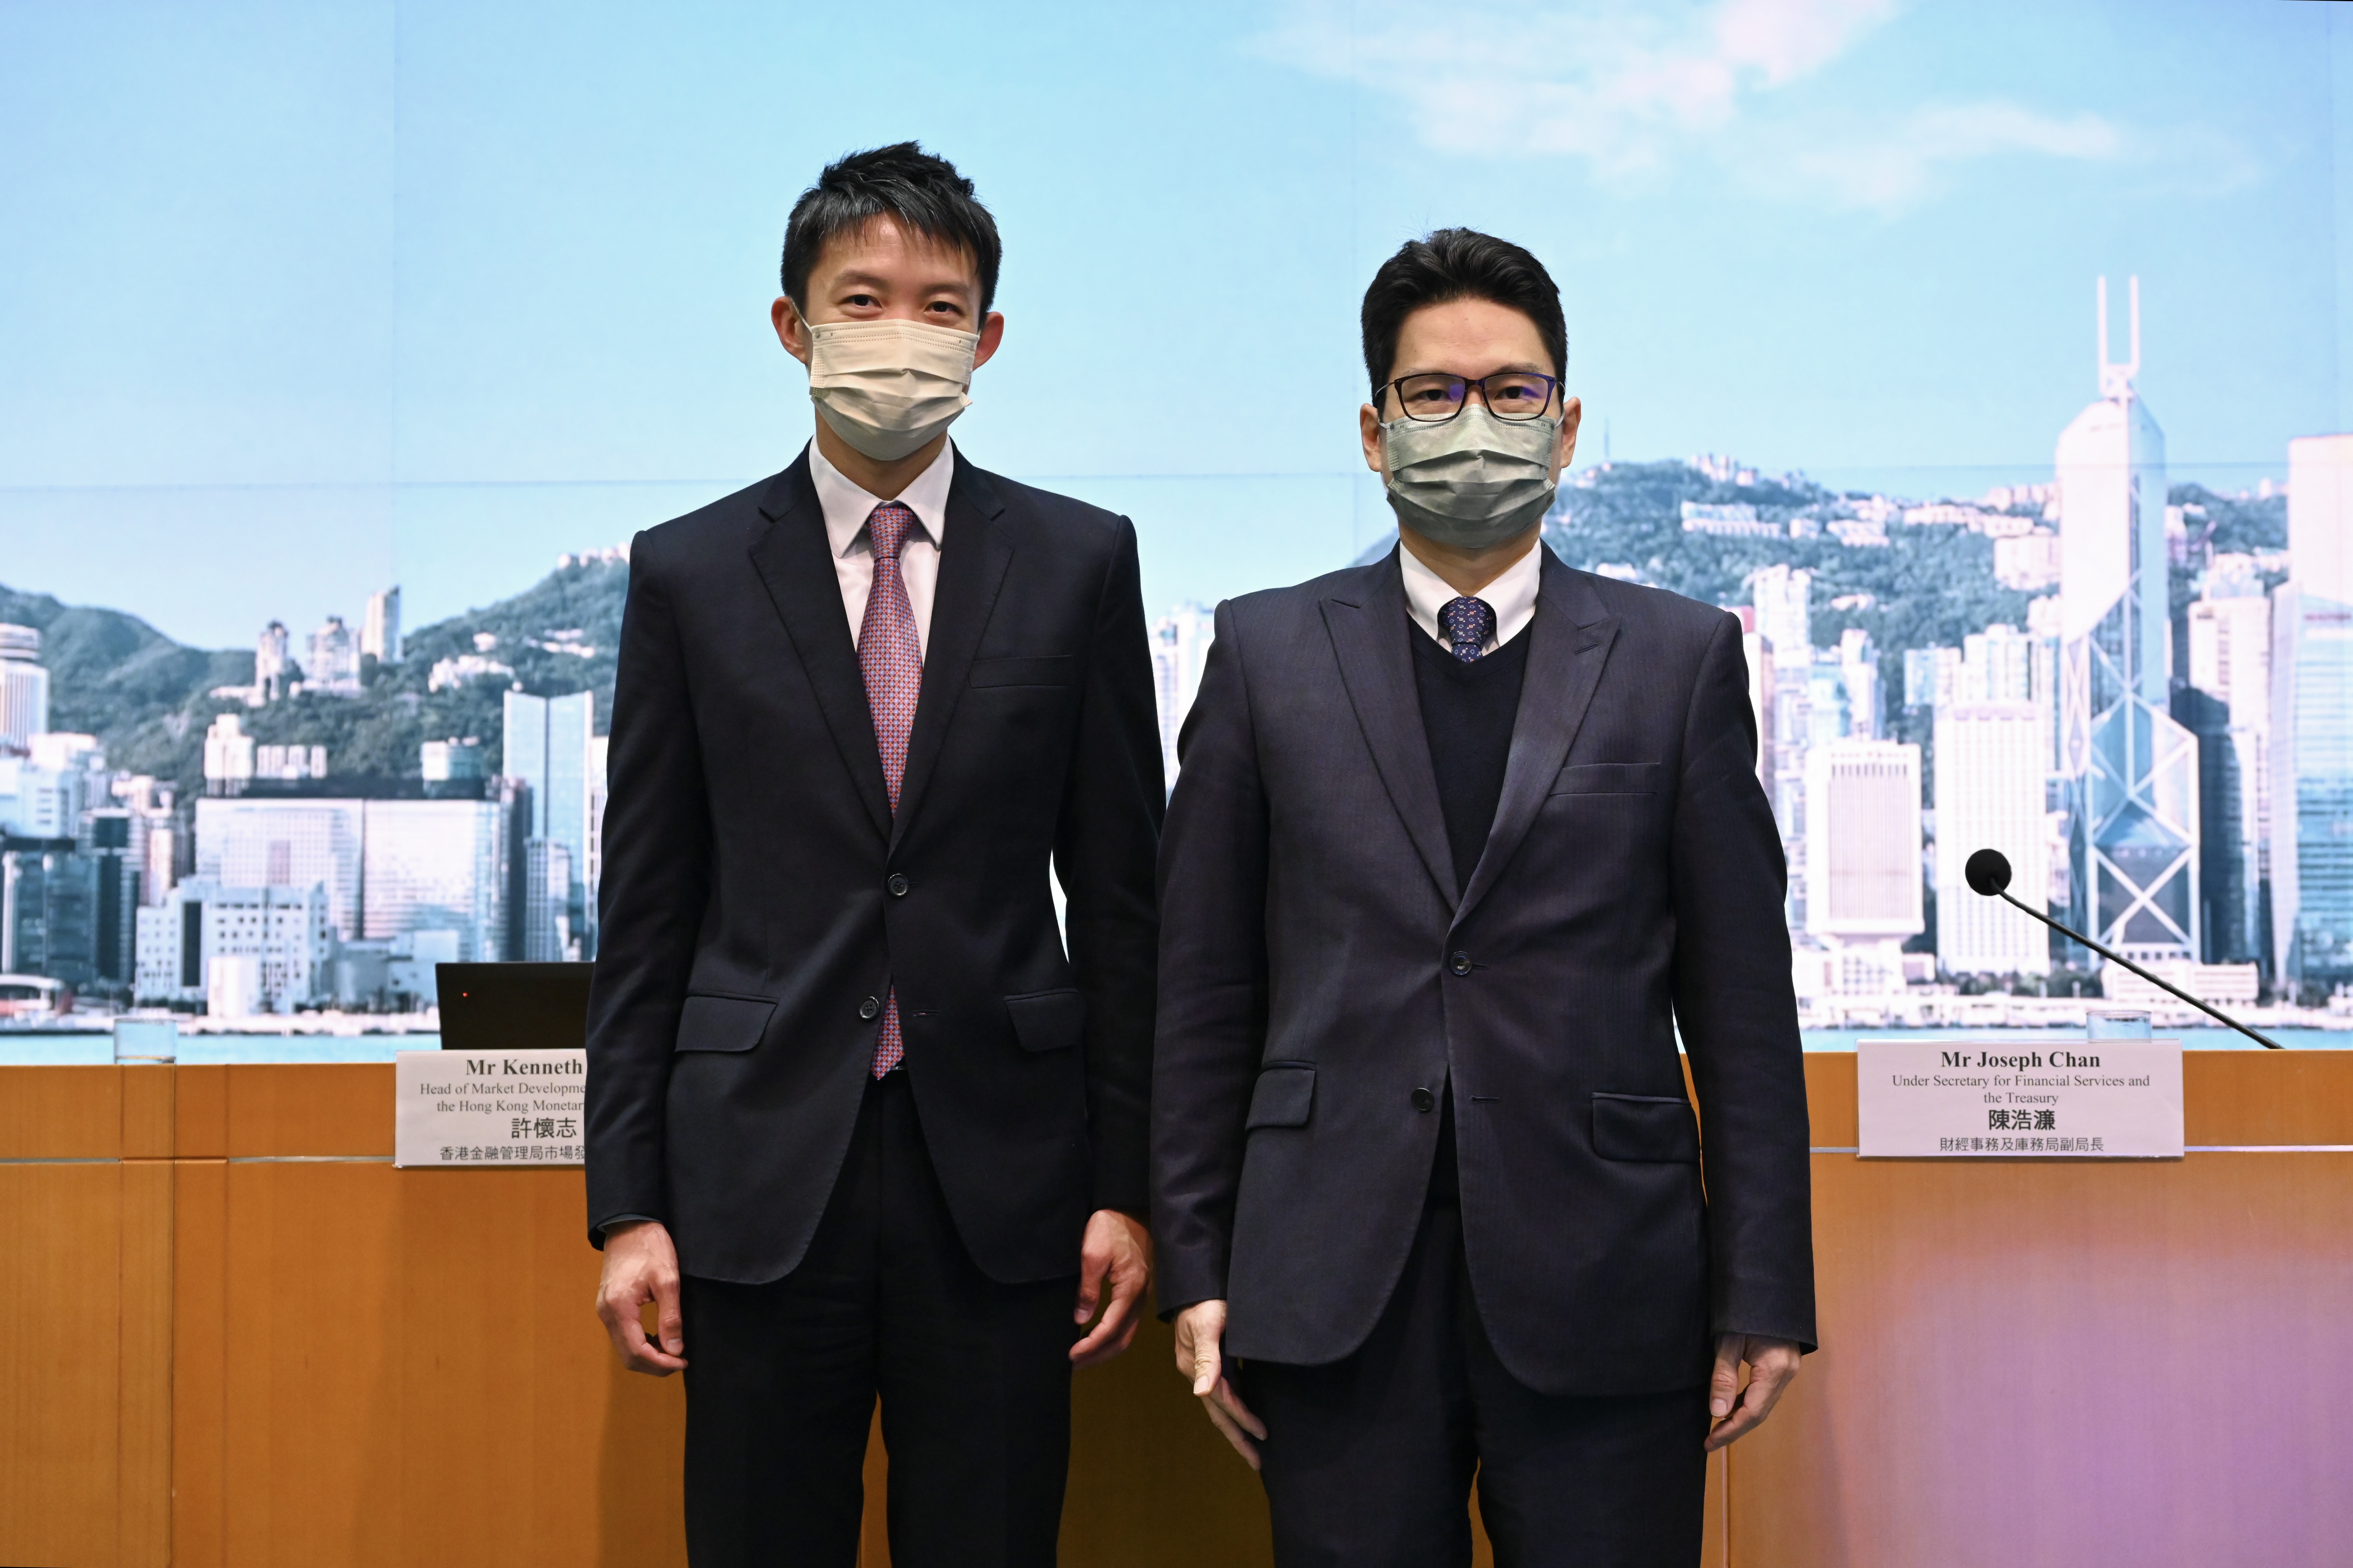 Photo shows the Under Secretary for Financial Services and the Treasury, Mr Joseph Chan (right), and the Head of Market Development Division of the Hong Kong Monetary Authority, Mr Kenneth Hui (left), attending the press conference.